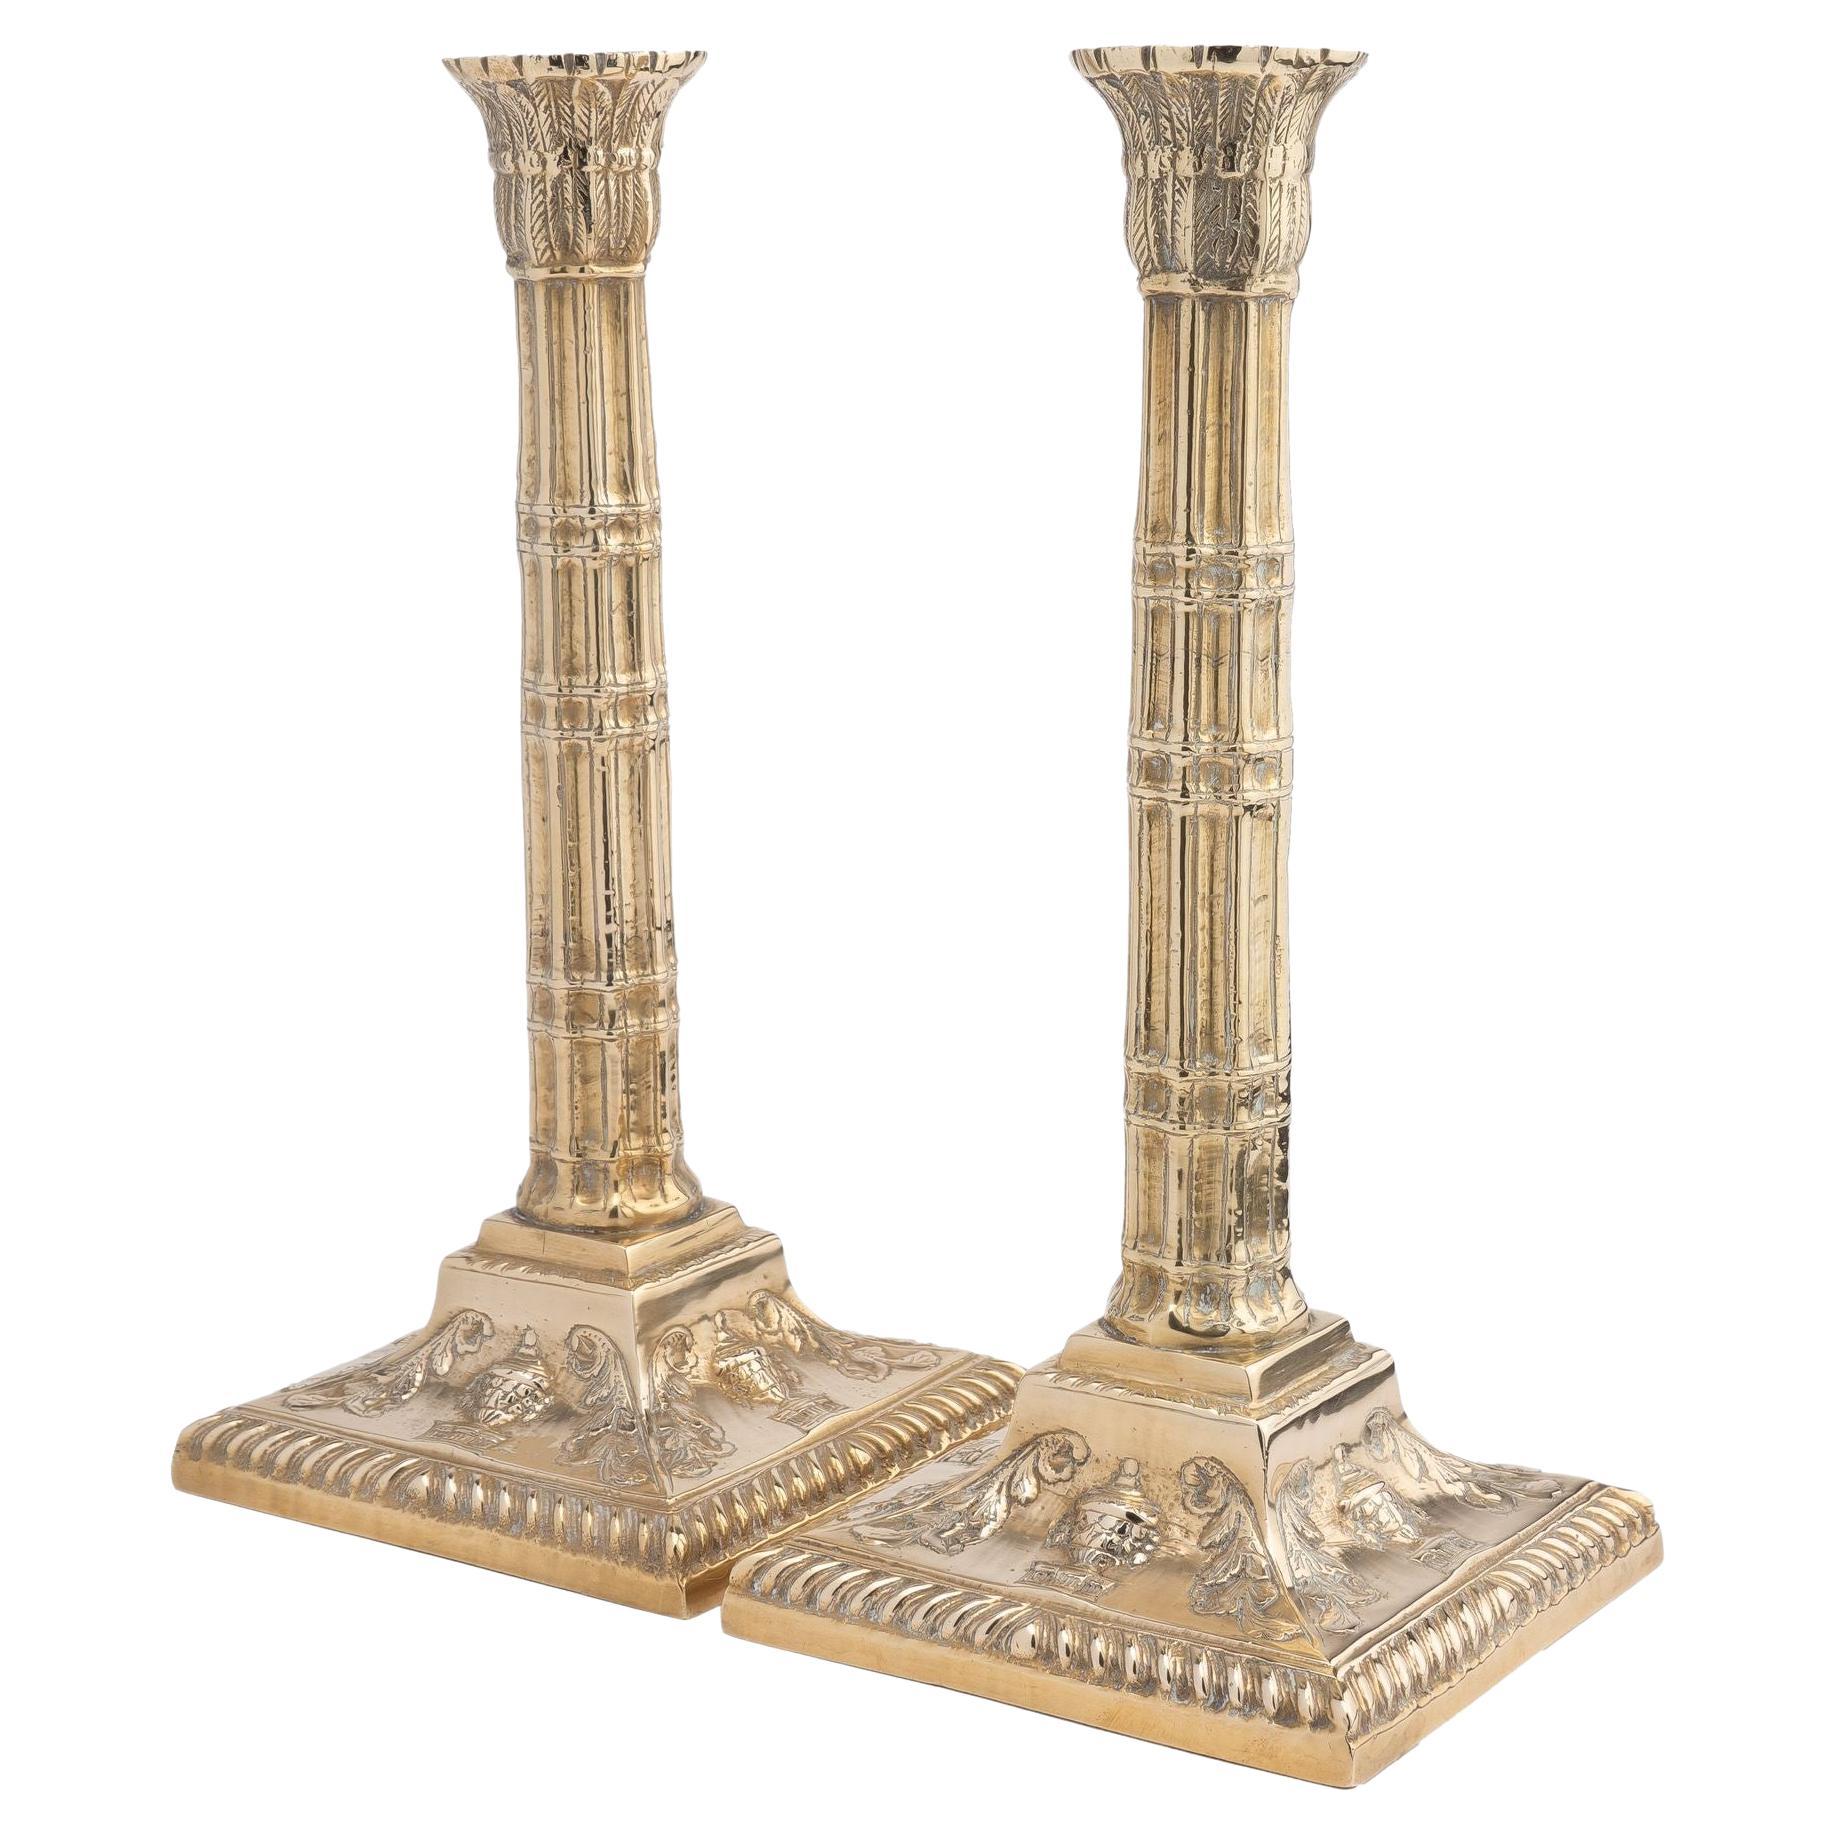 Pair of cast cluster column candlesticks by Martin, Hall & Co Ltd, 1850-75